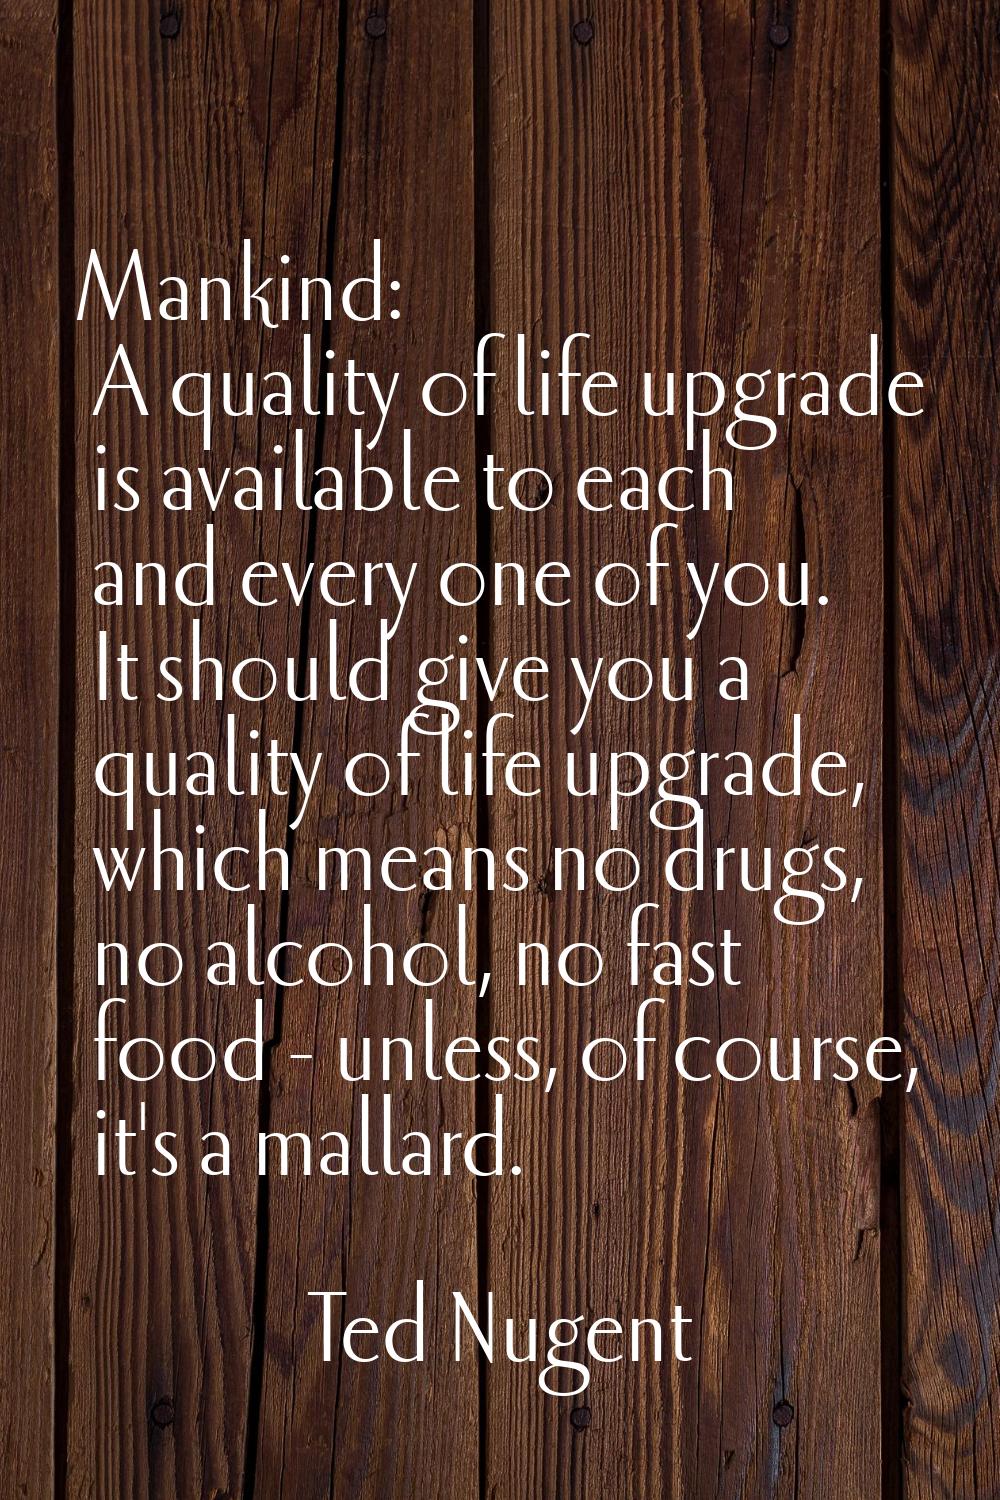 Mankind: A quality of life upgrade is available to each and every one of you. It should give you a 